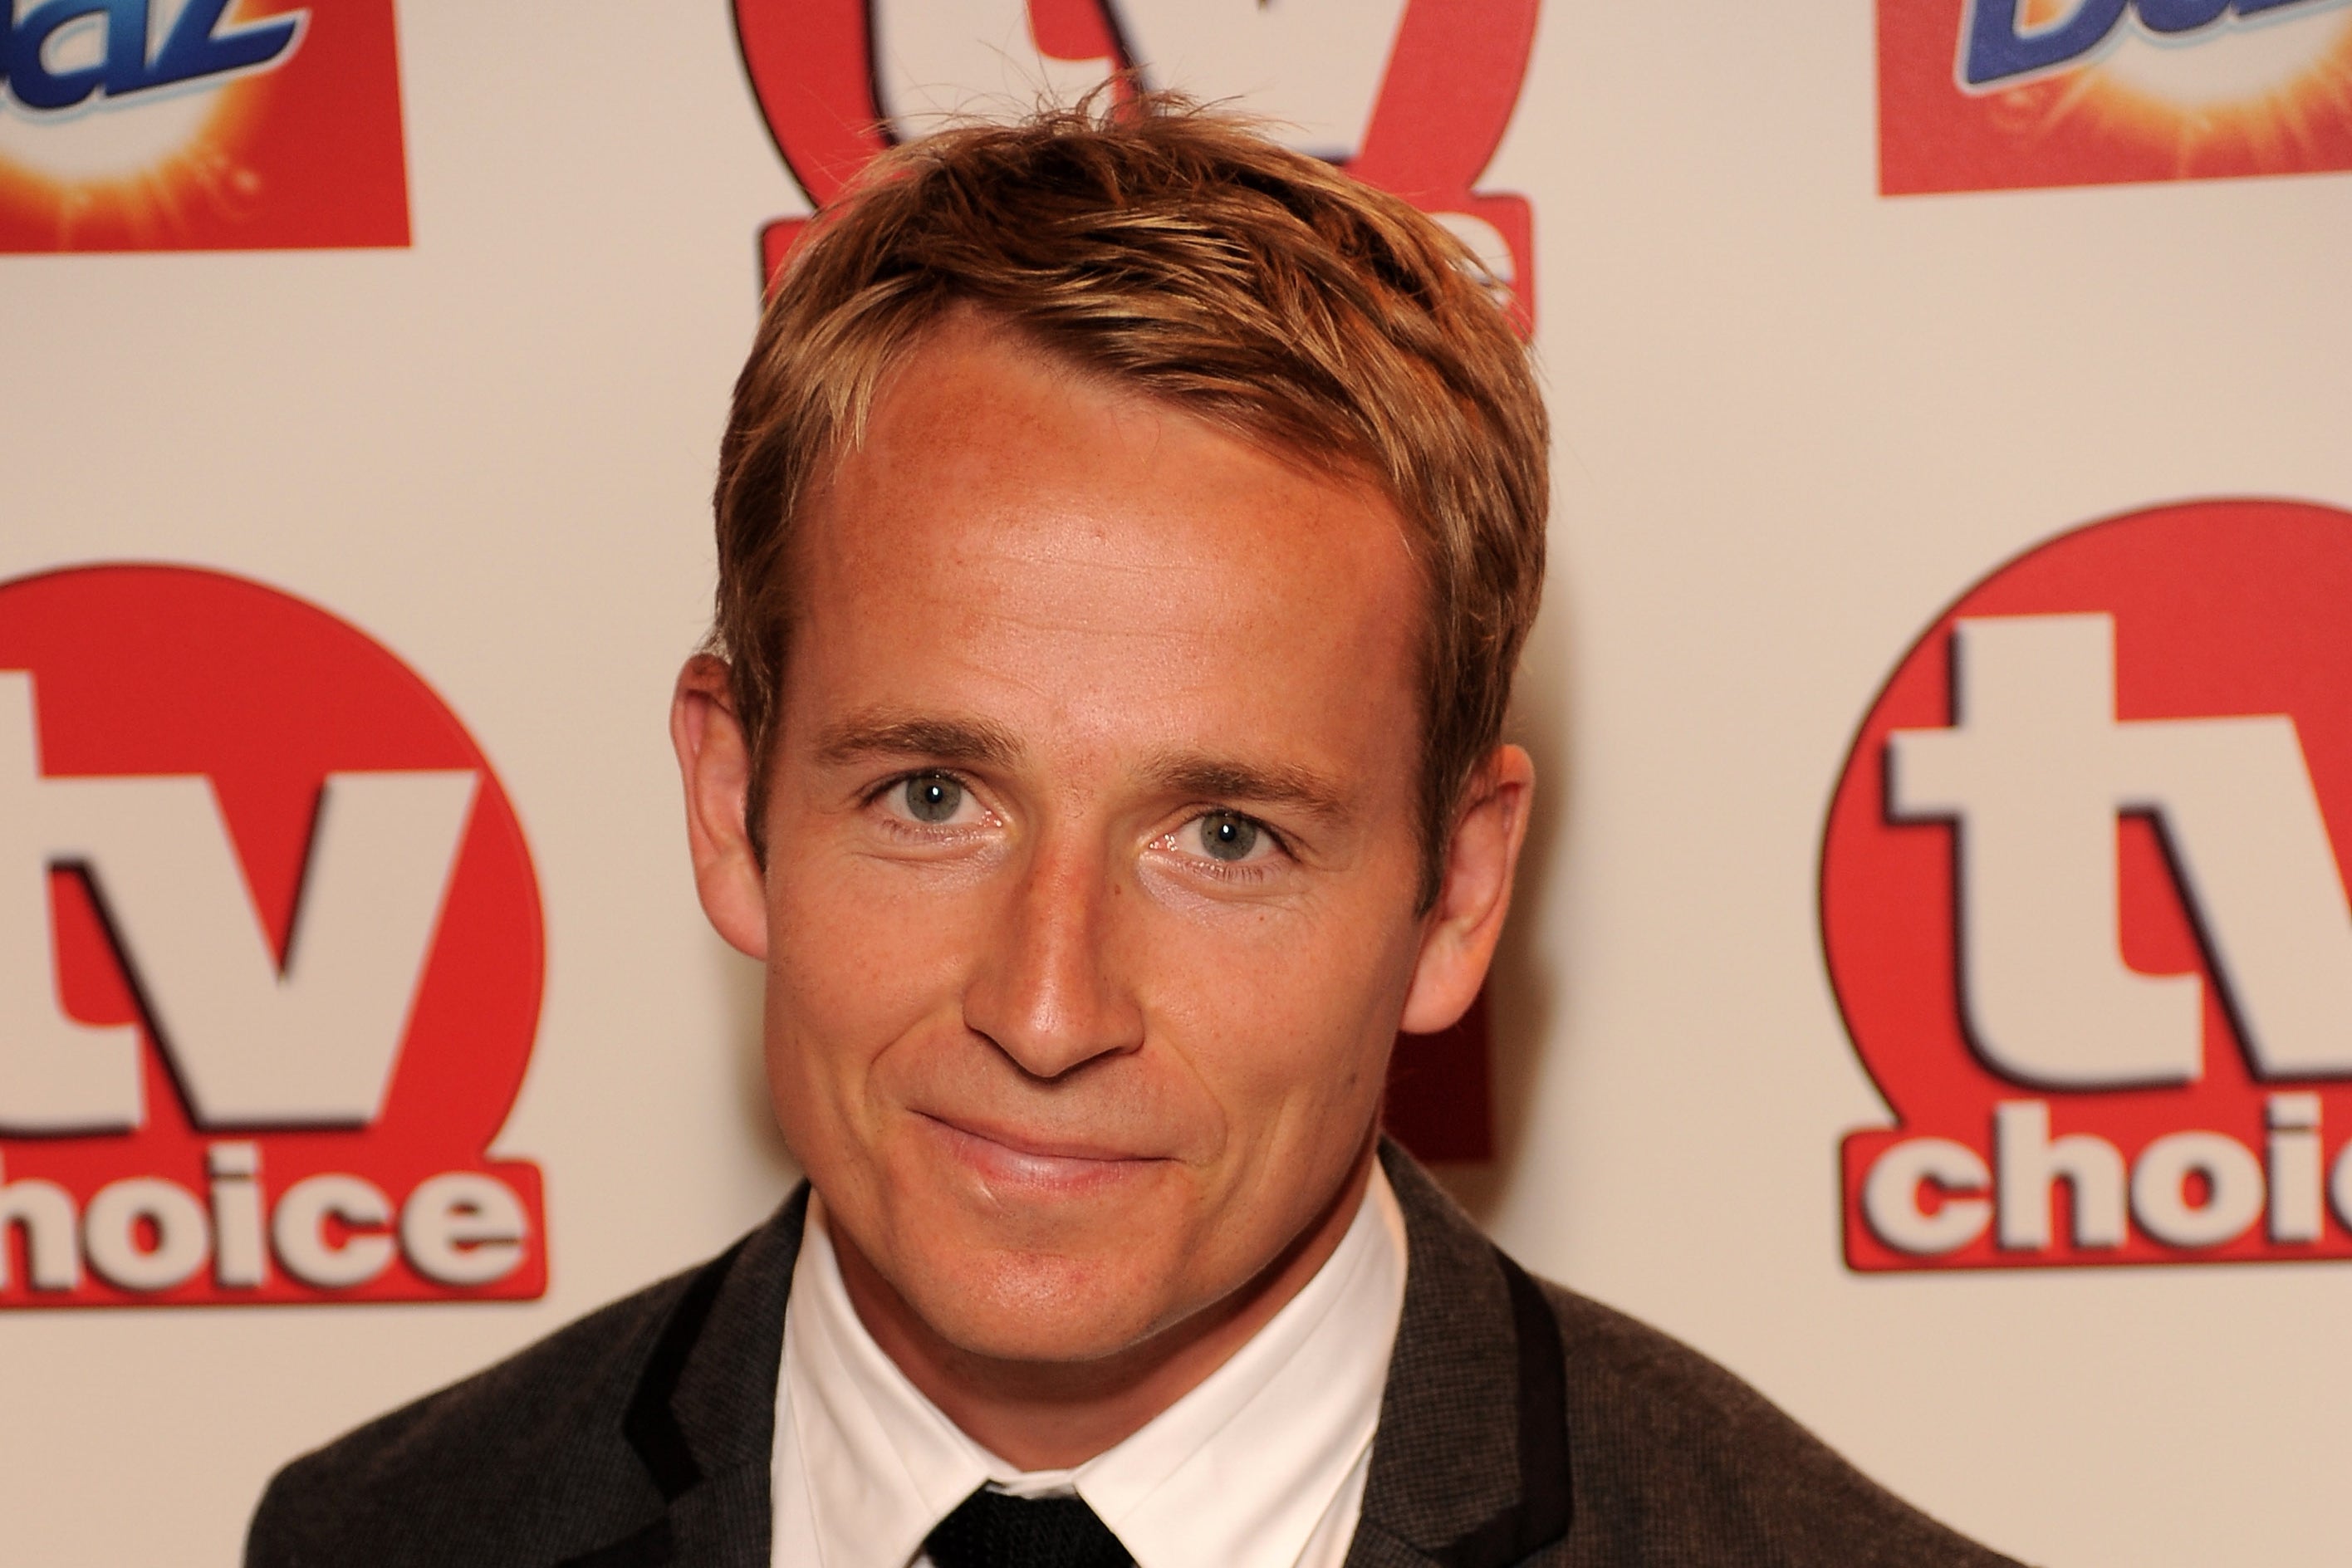 Jonnie Irwin pictured in 2010 at the TV Choice Awards